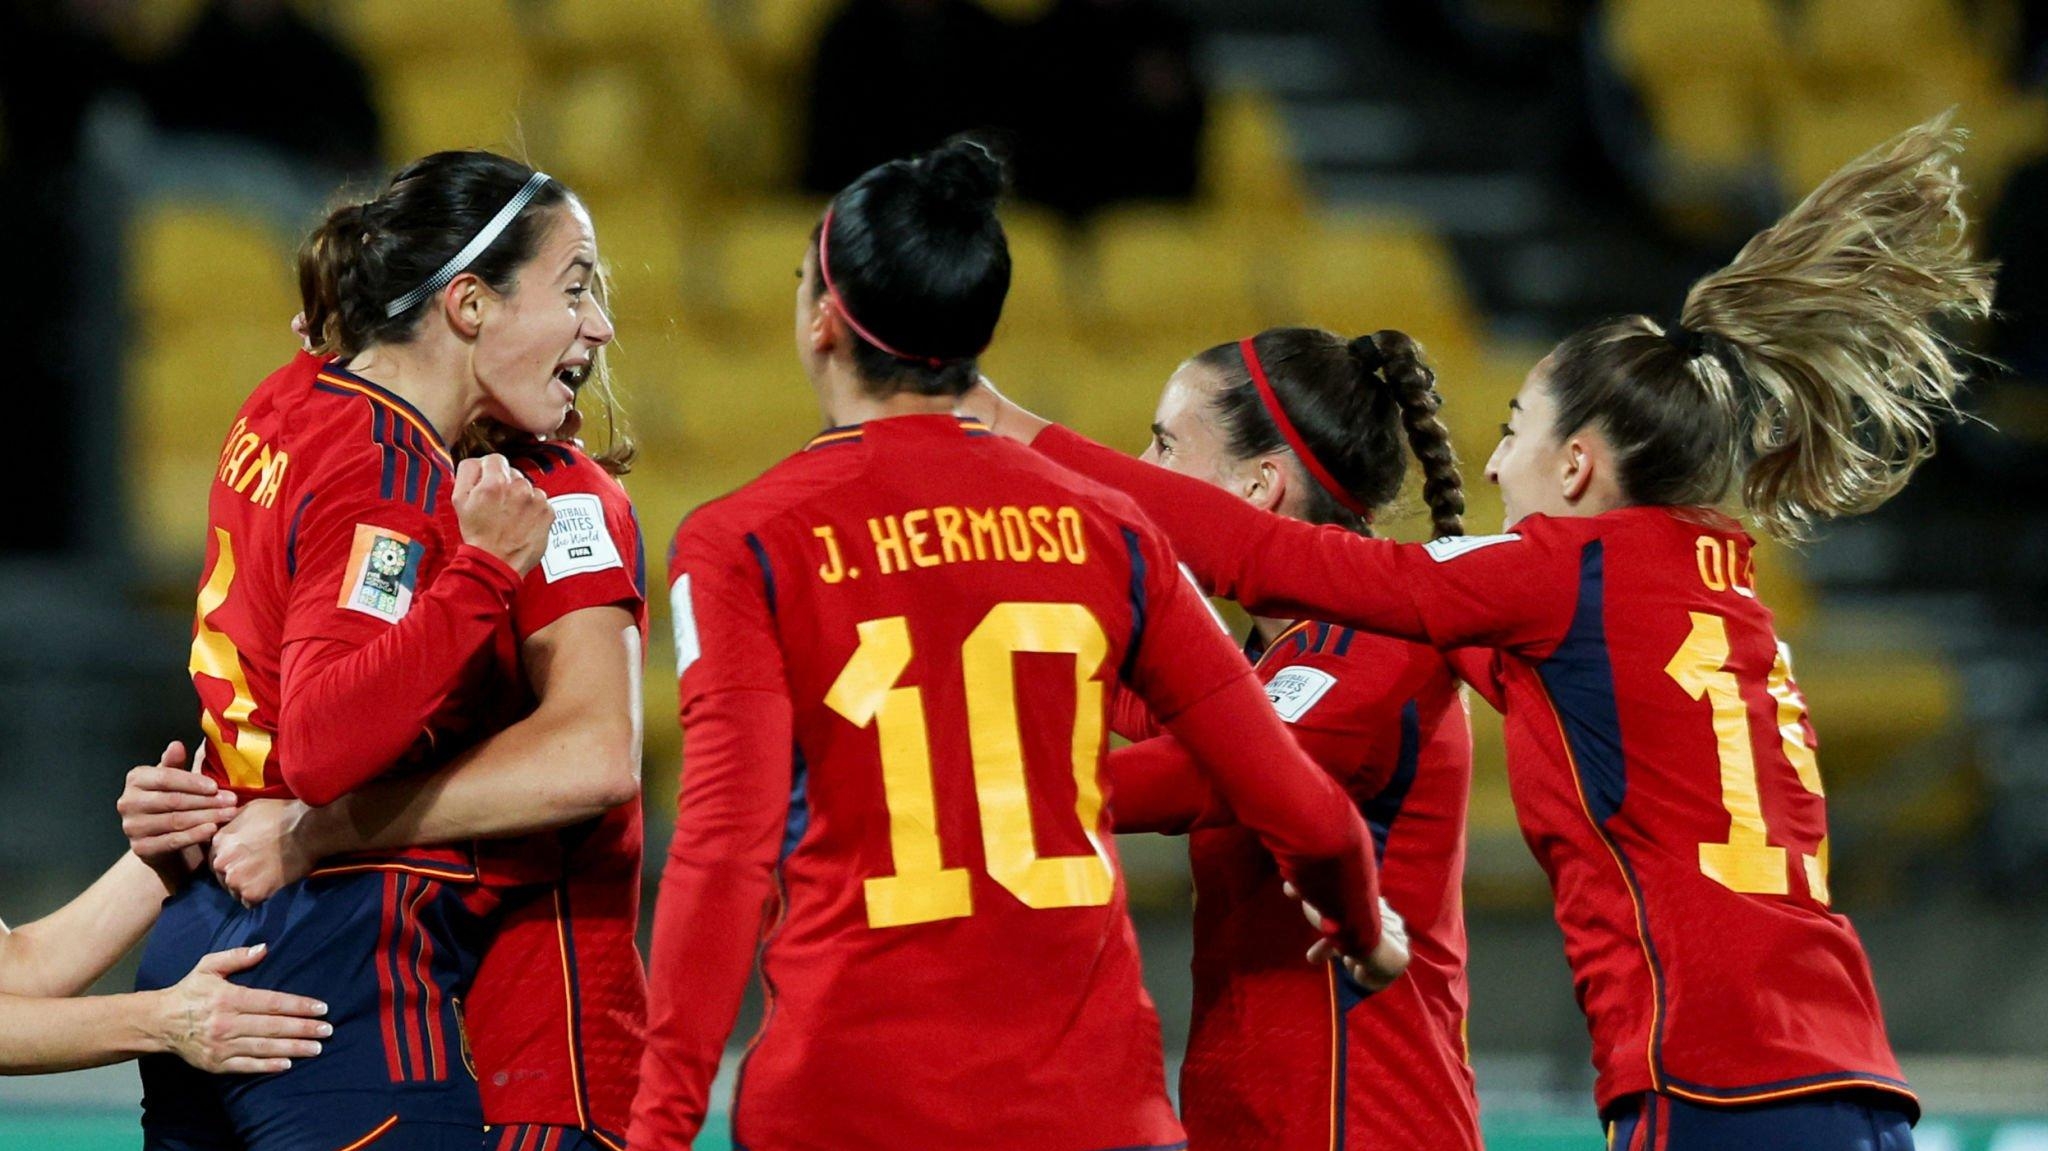 Spain surprises in the debut of the Women's World Cup